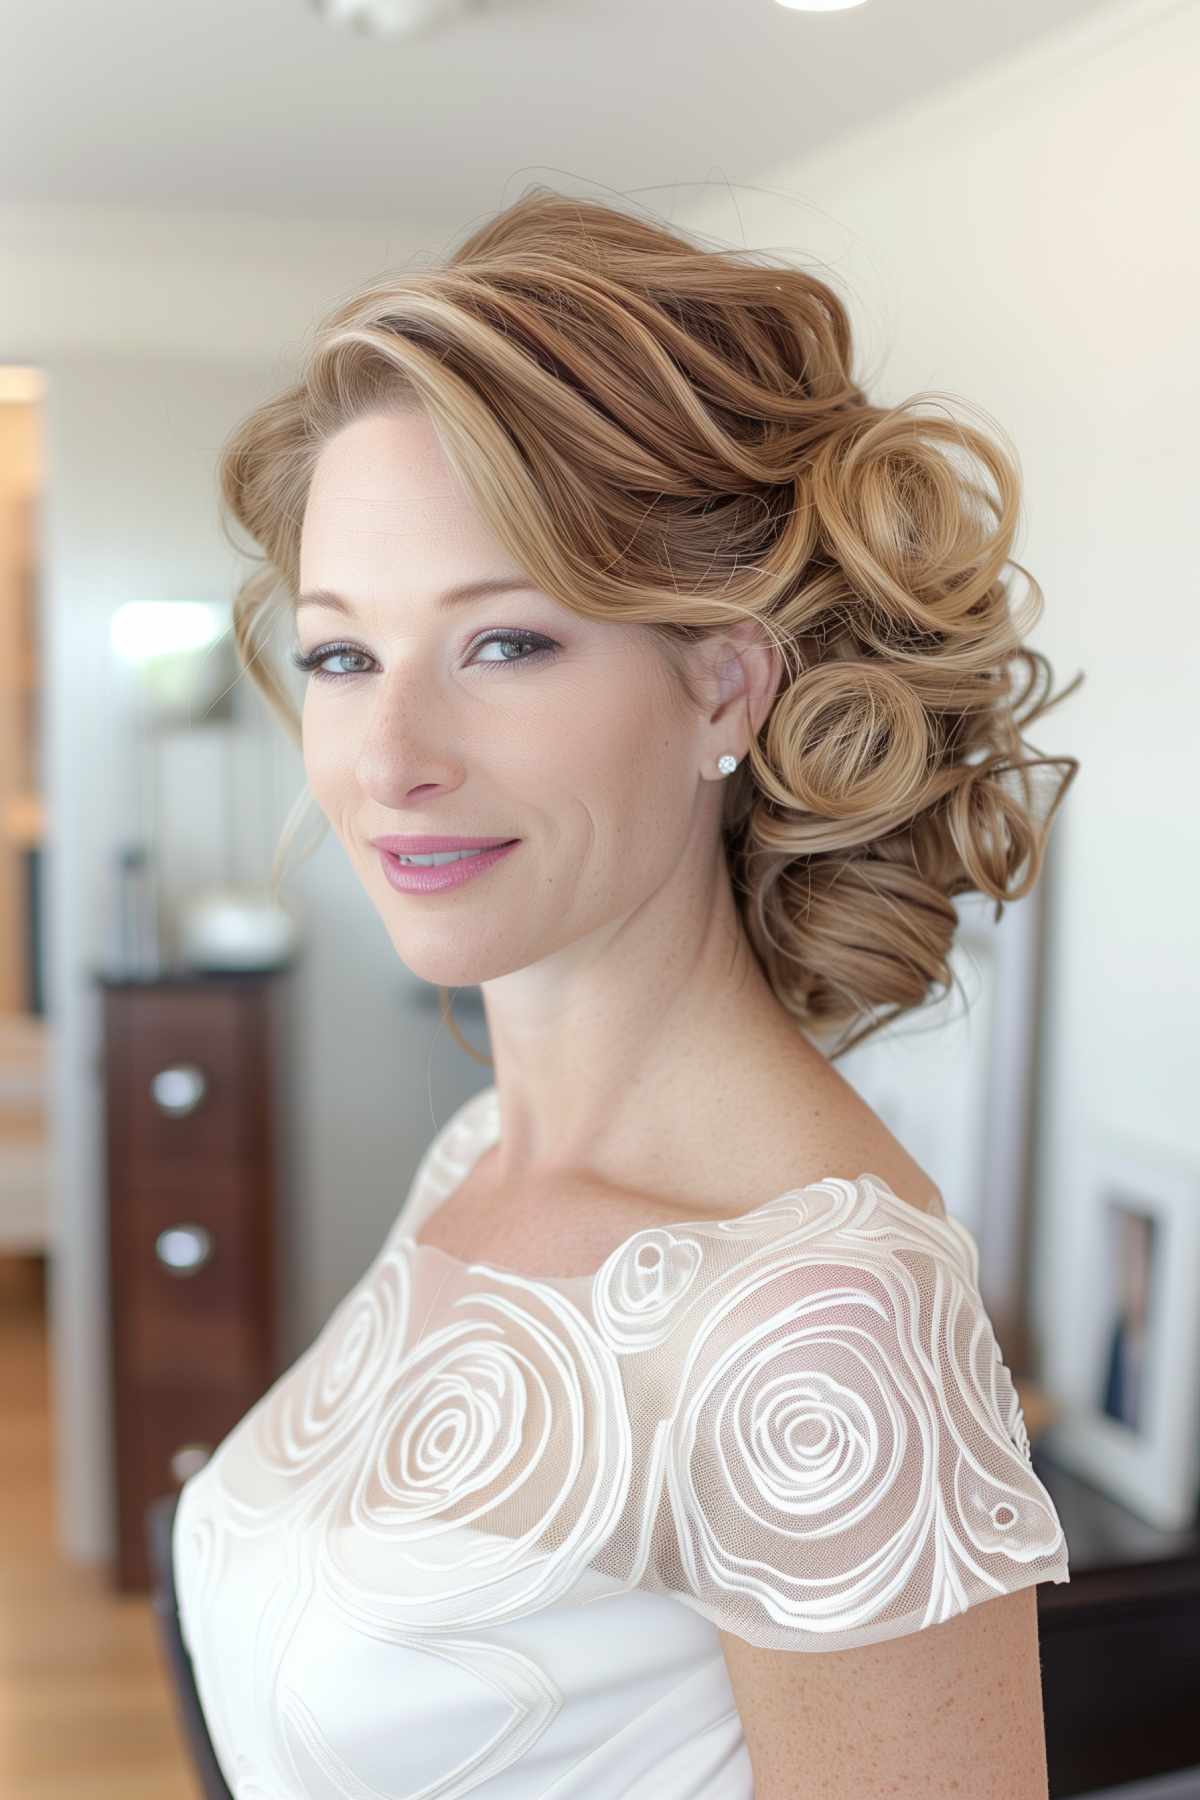 Sophisticated upstyle with meticulously sculpted pin curls and waves, ideal for a formal wedding or event.